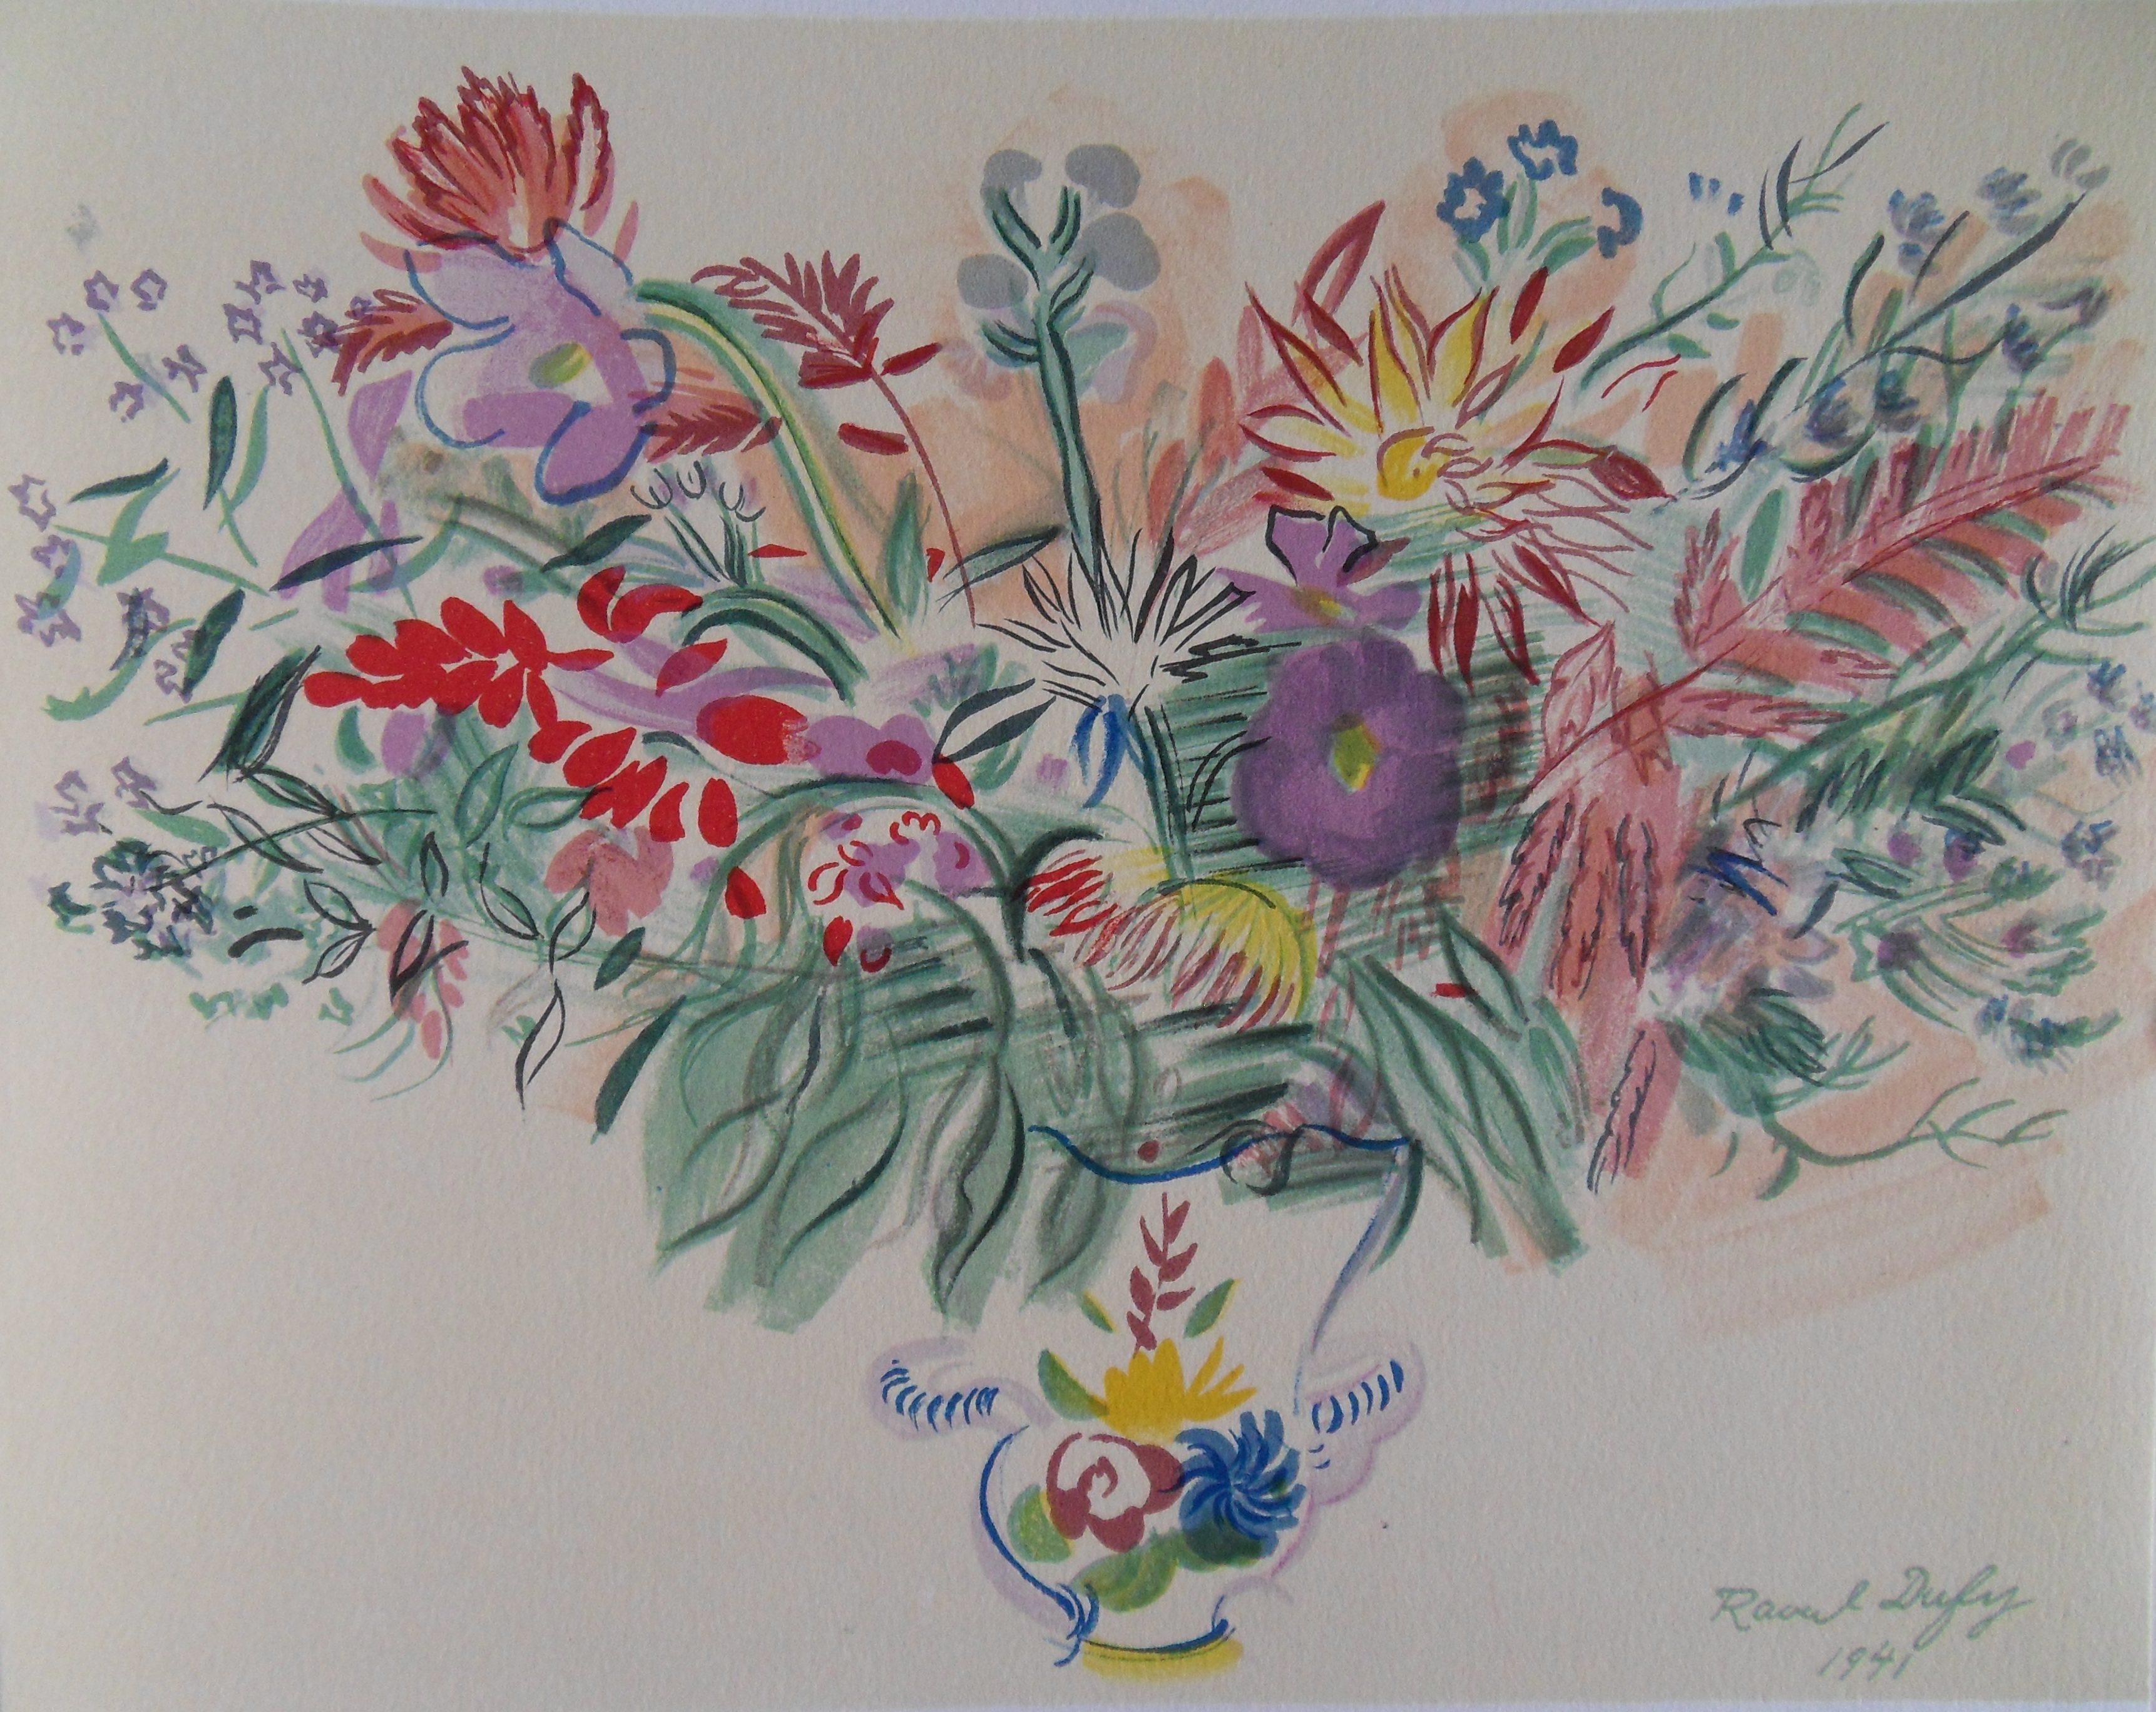 Colorful Bouquet of Flowers - Original lithograph - 1965 - Print by Raoul Dufy